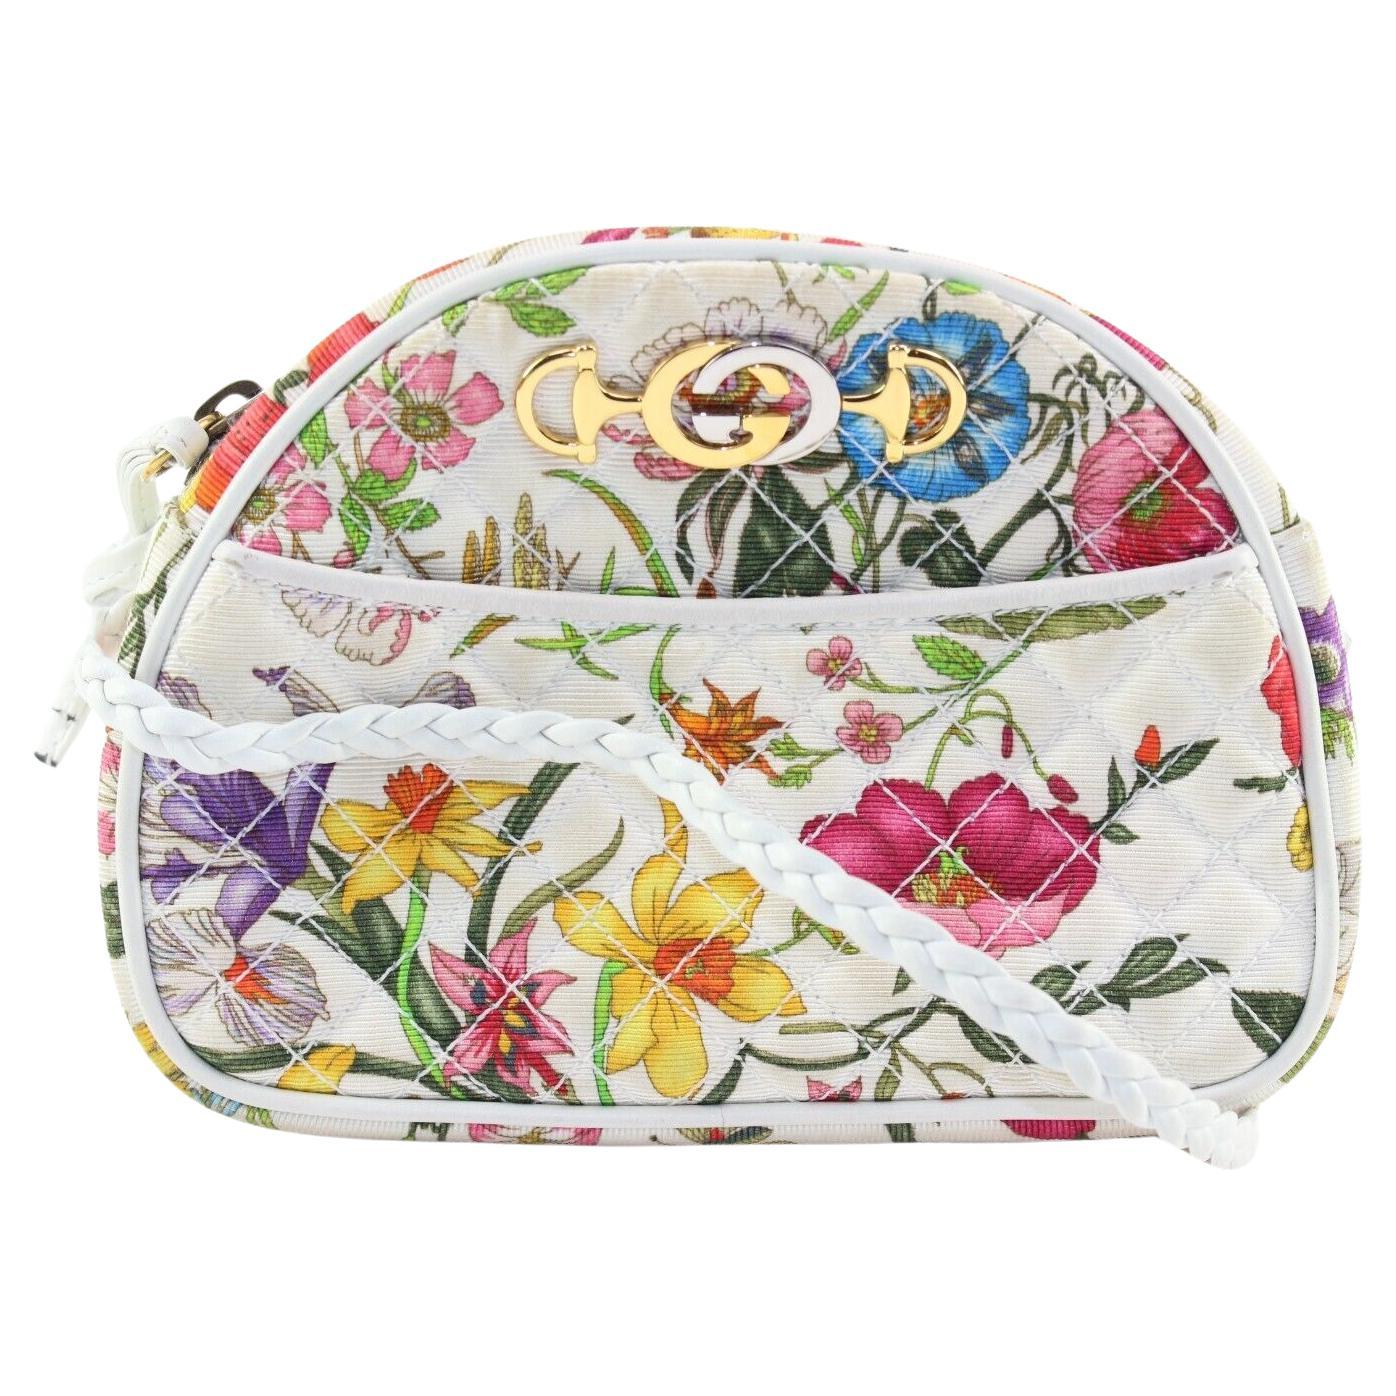 GUCCI Quilted Floral Trapuntata Crossbody 4GK0104K For Sale